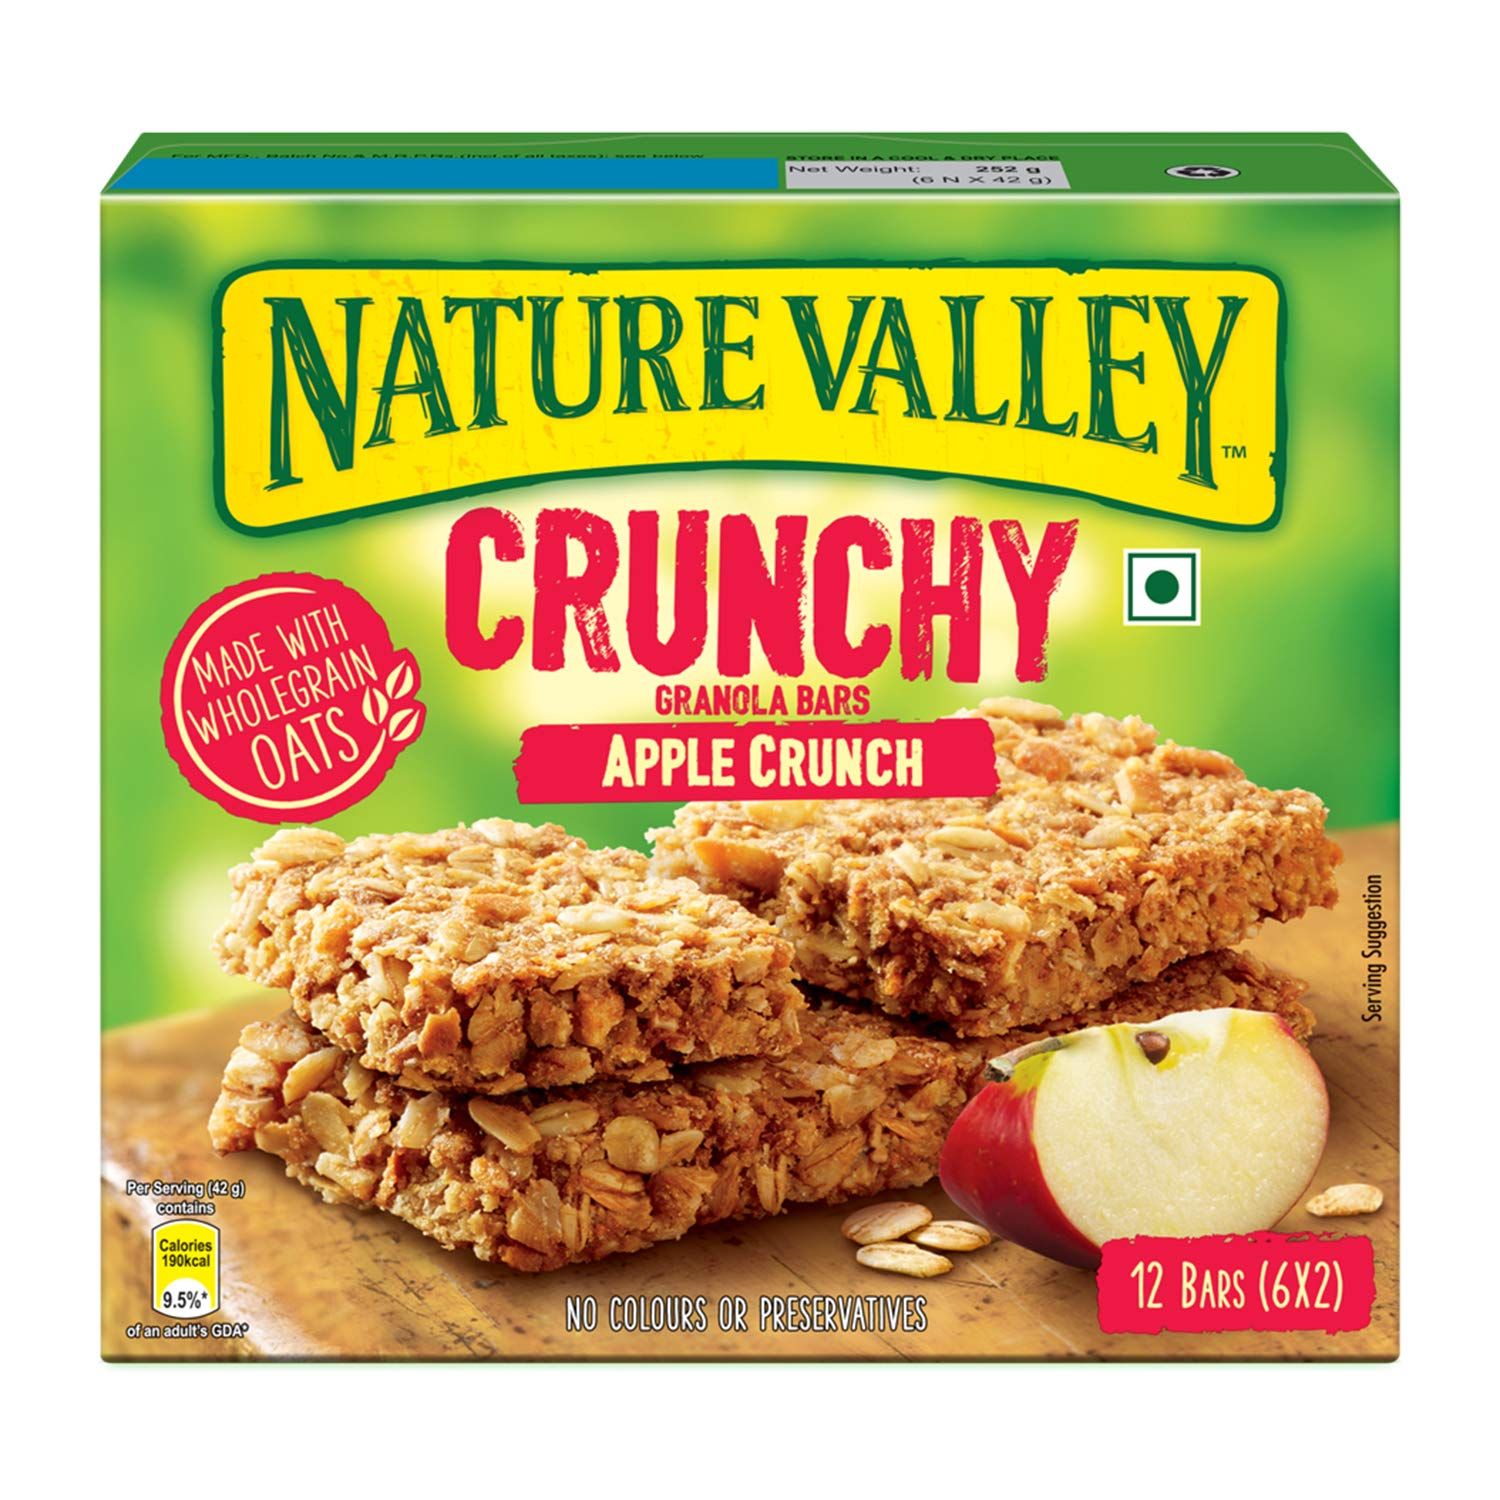 Nature Valley Crunchy Apple Crunch Image